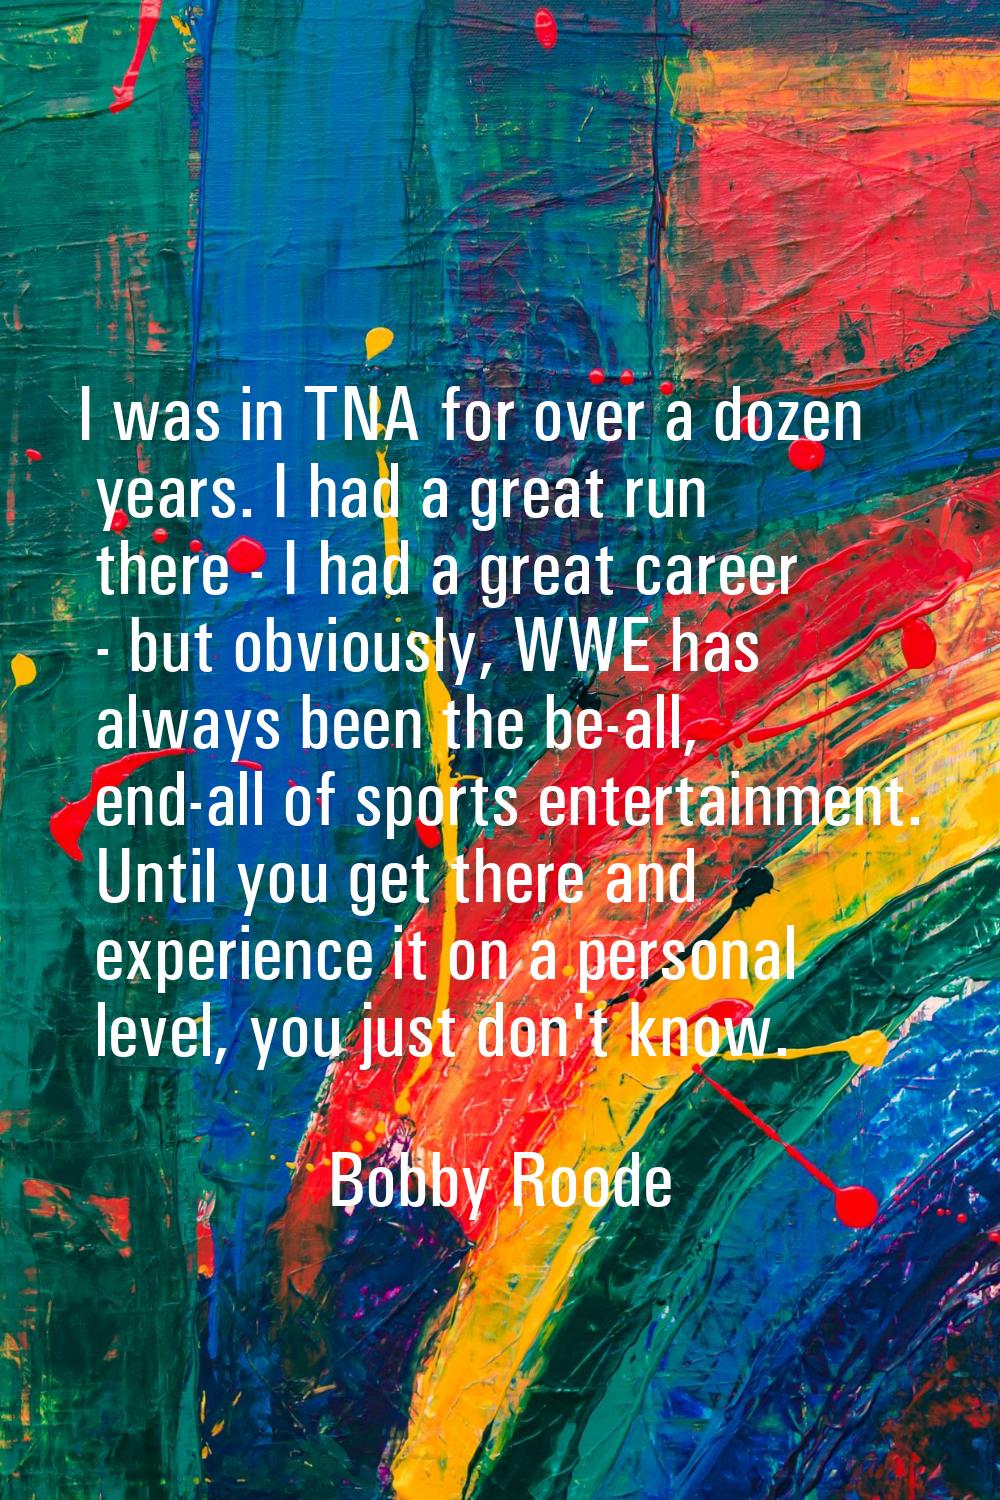 I was in TNA for over a dozen years. I had a great run there - I had a great career - but obviously